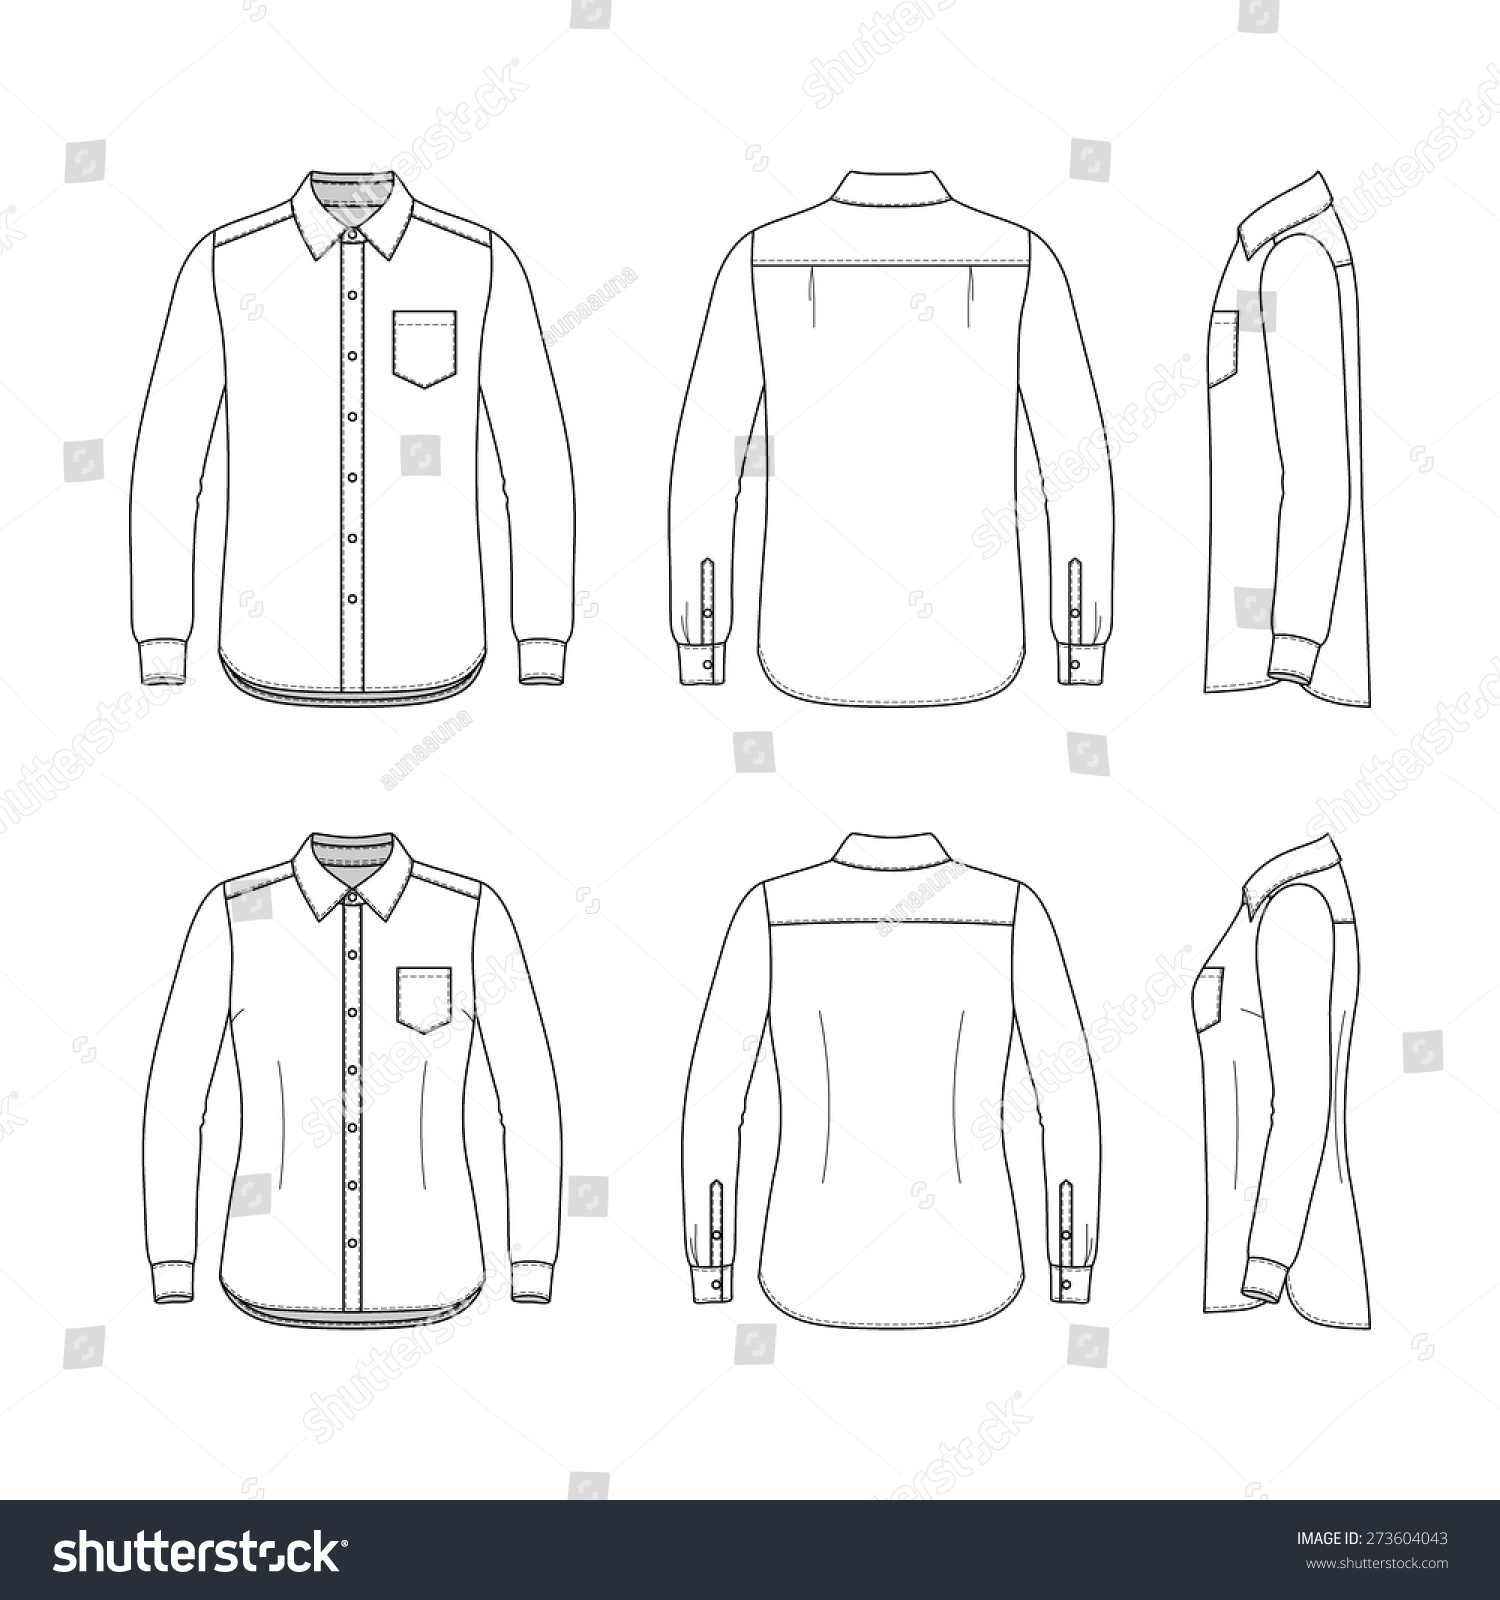 Front, Back And Side Views Of Clothing Set. Blank Templates Of Men'S ...